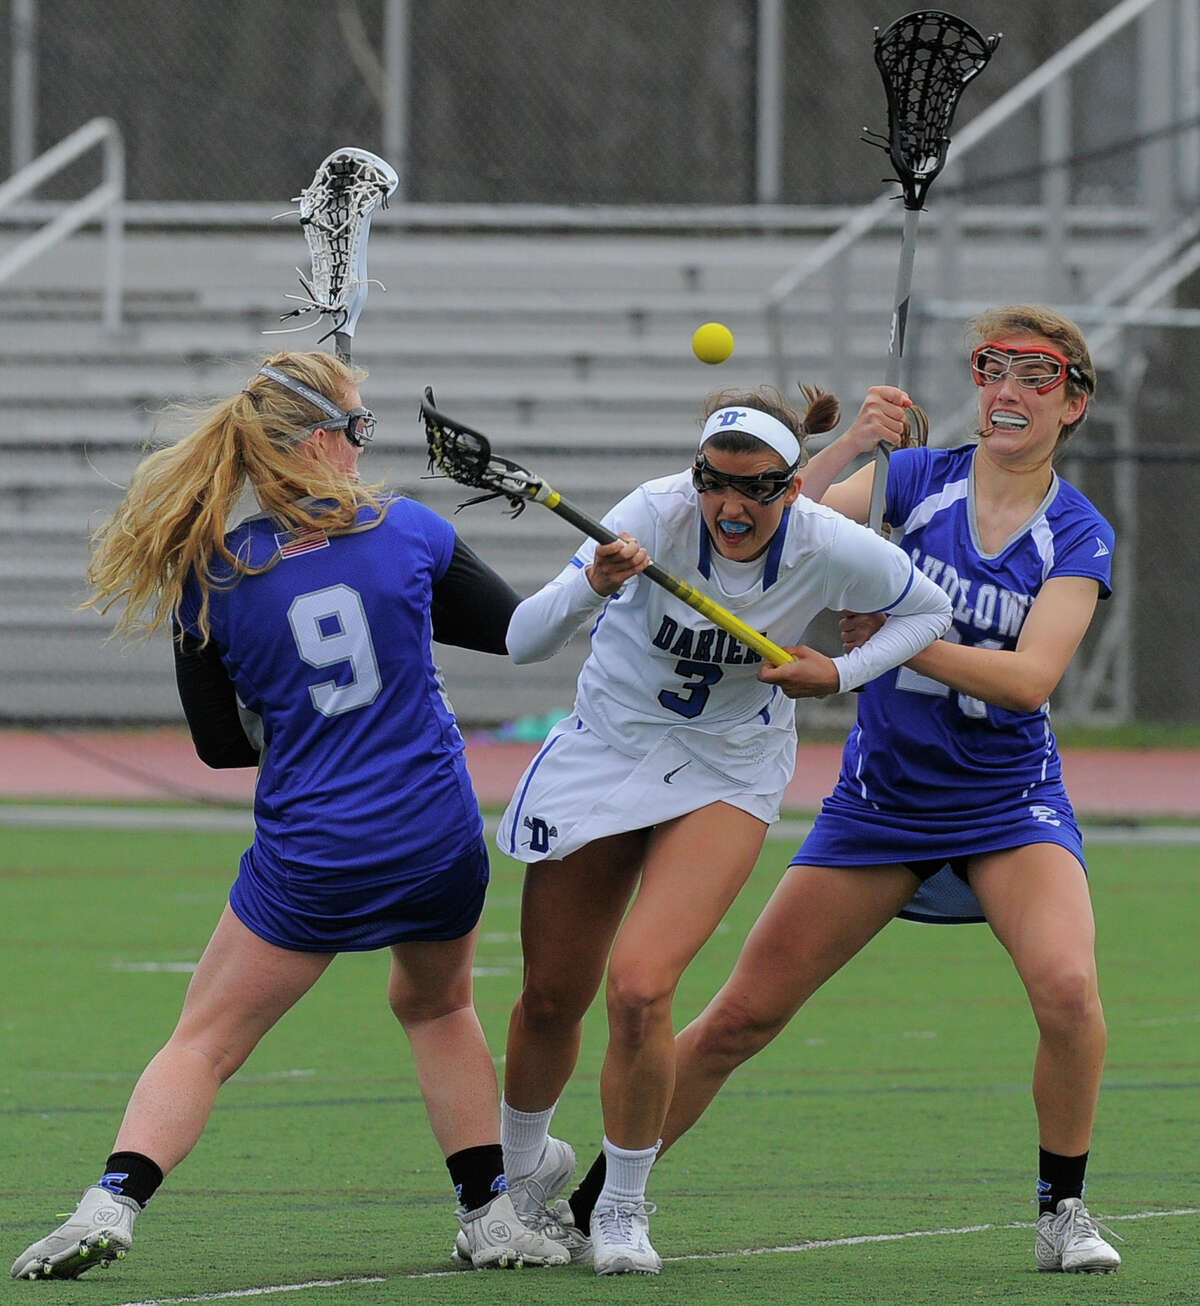 Darien’s Emma Lesko, center, fights to recover a loose ball between Ludlowe’s Paige Wilkman, left, and Amanda Schramm (21) during the first half Thursday in Darien.